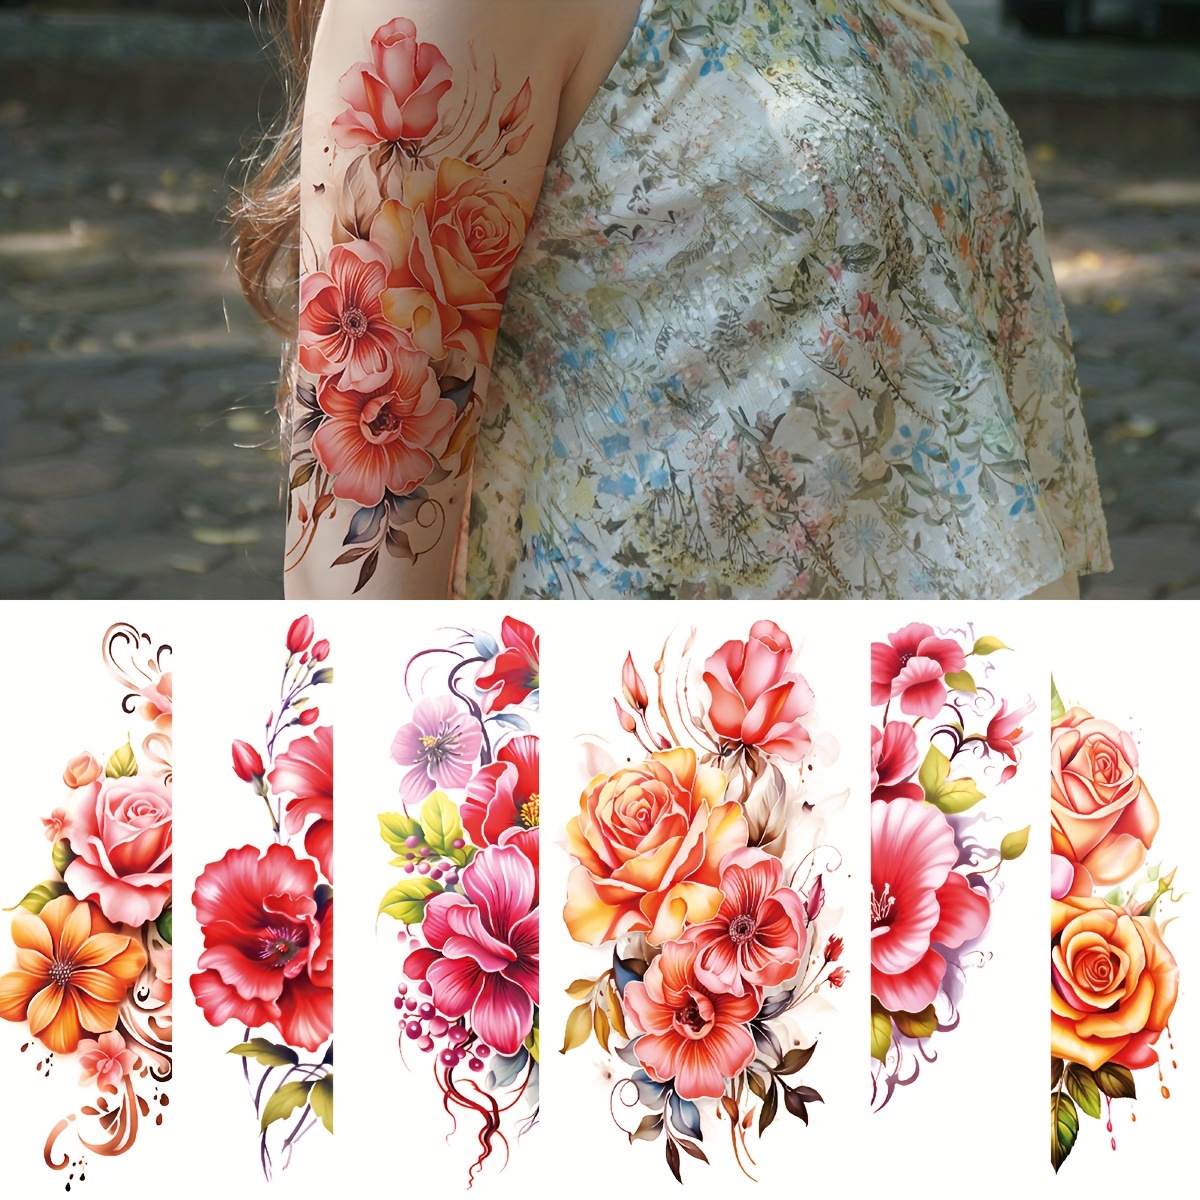 

6pcs/set Waterproof Colorful Blooming Flower Patterns Temporary Tattoo Stickers Half Arms Makeup Lasting 3-7 Days